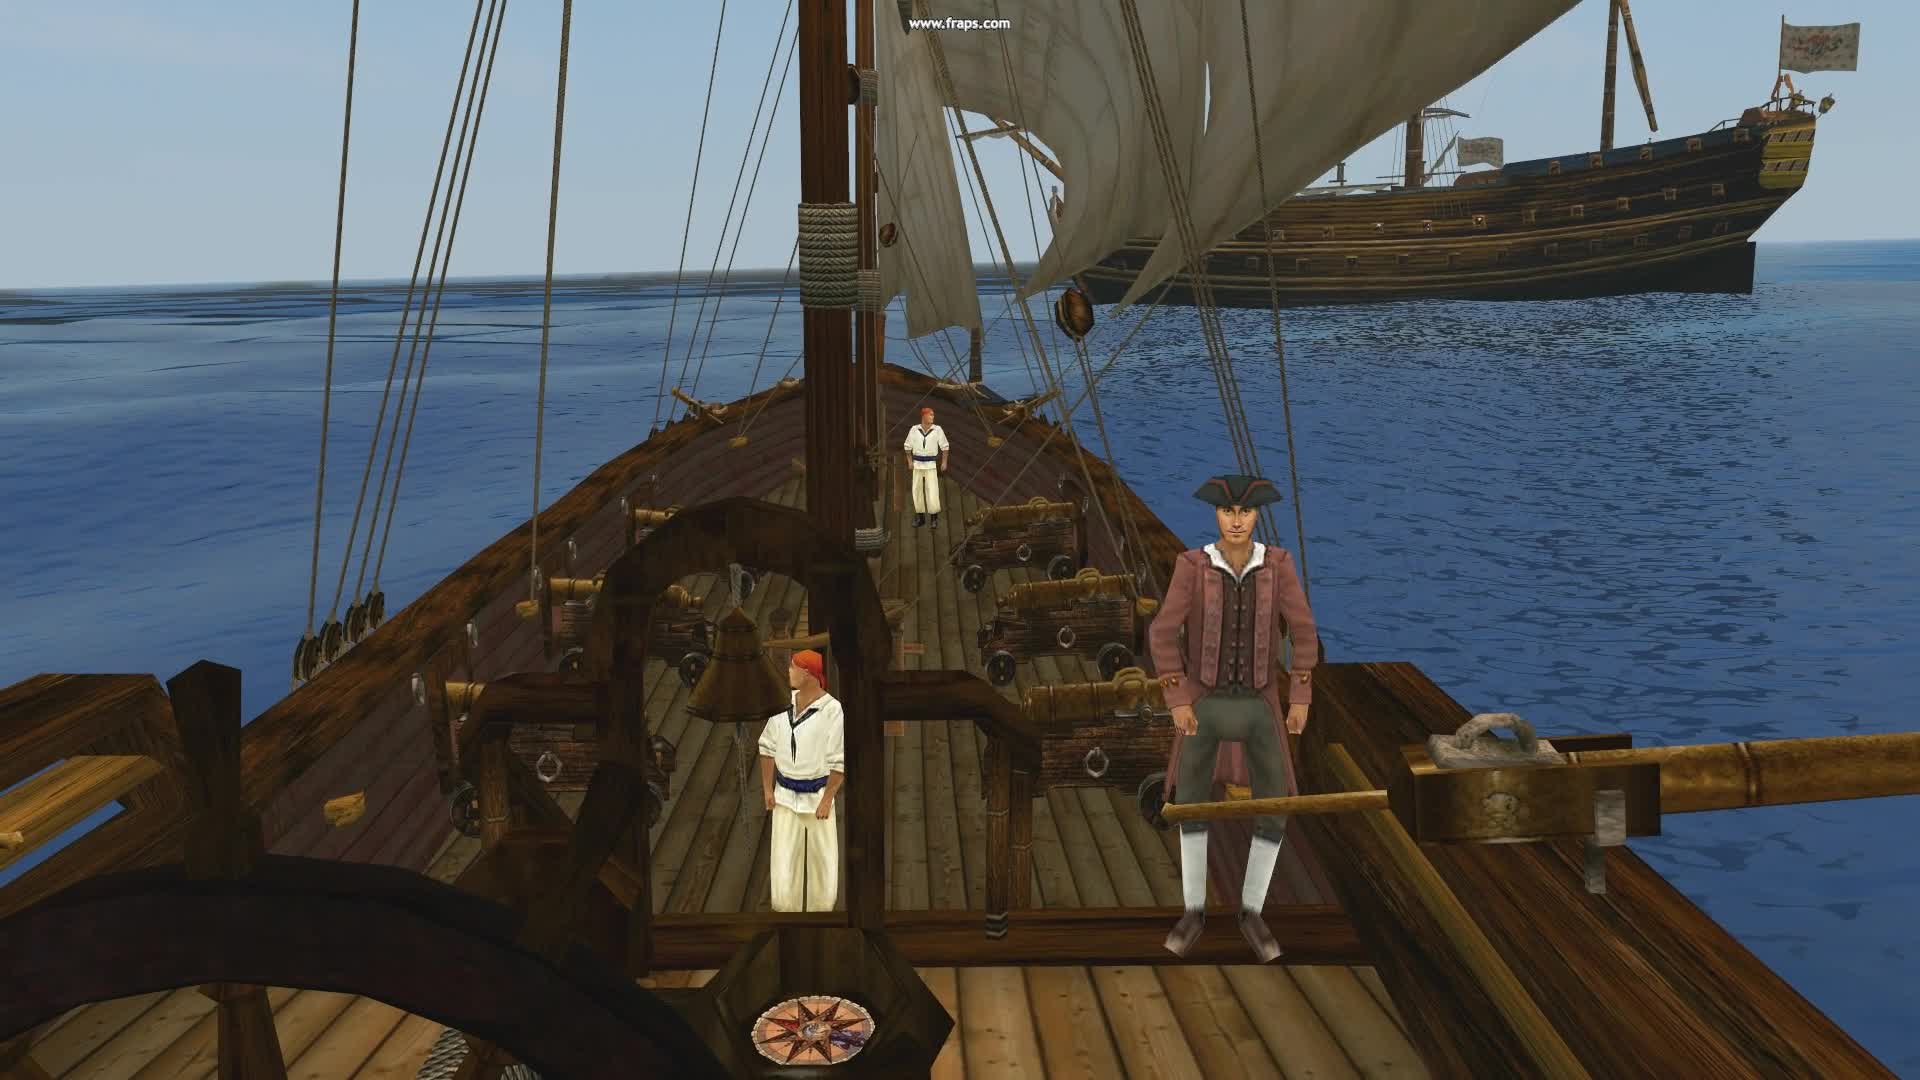 pirates of the caribbean game tow mod